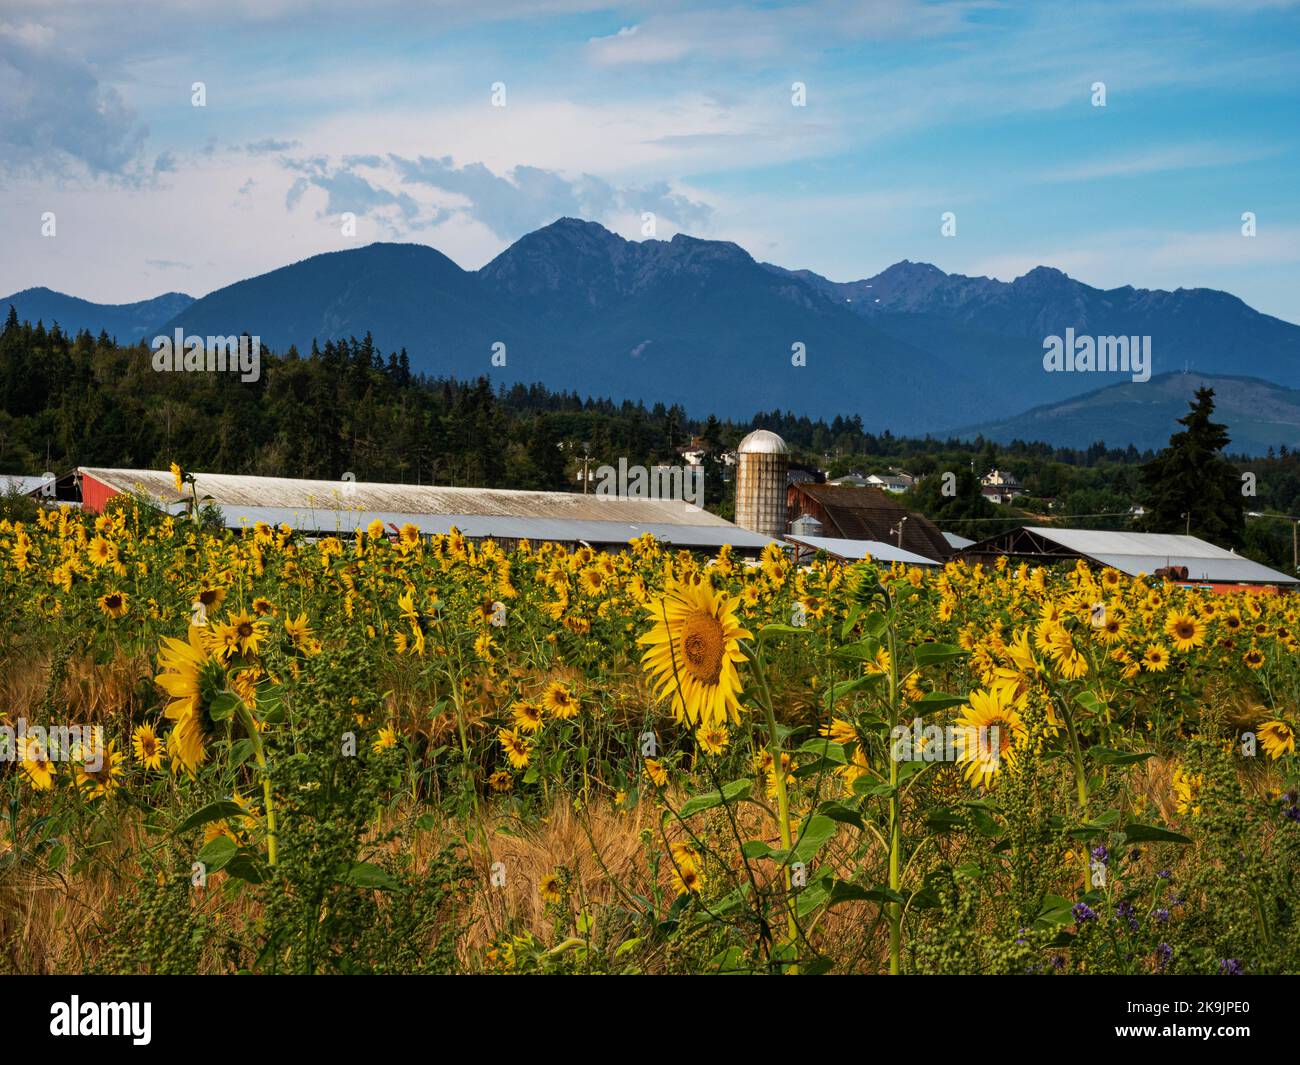 WA22642-00...WASHINGTON - A commercial field of sunflowers viewed from the Olympic Discovery Trail in Sequim. Stock Photo